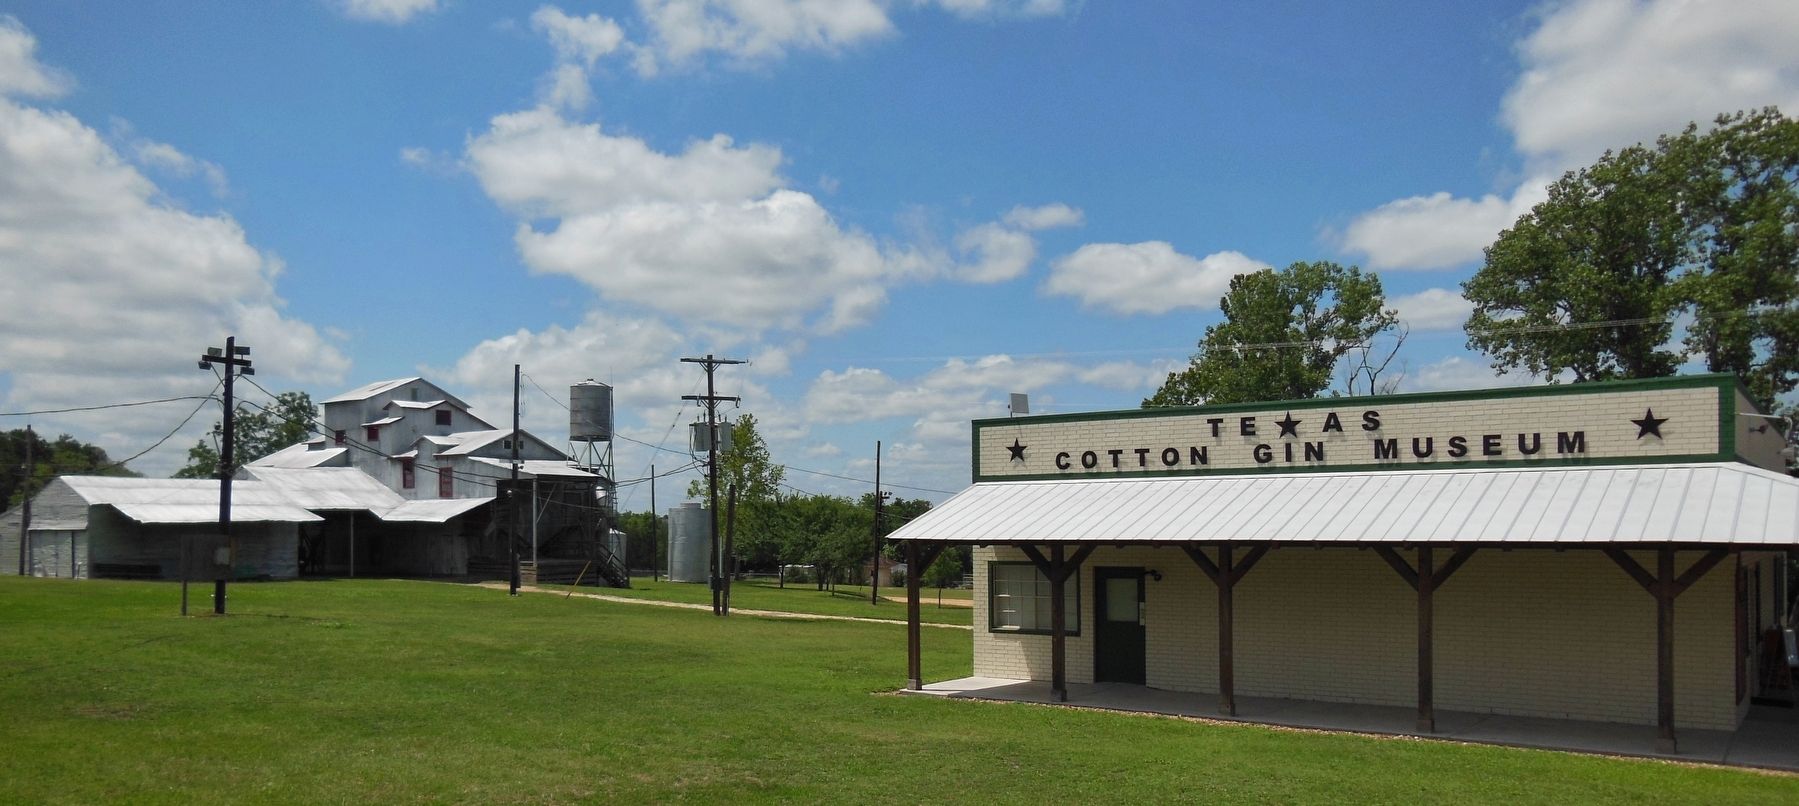 Texas Cotton Gin Museum (<i>Burton Farmers Gin in background</i>) image. Click for full size.